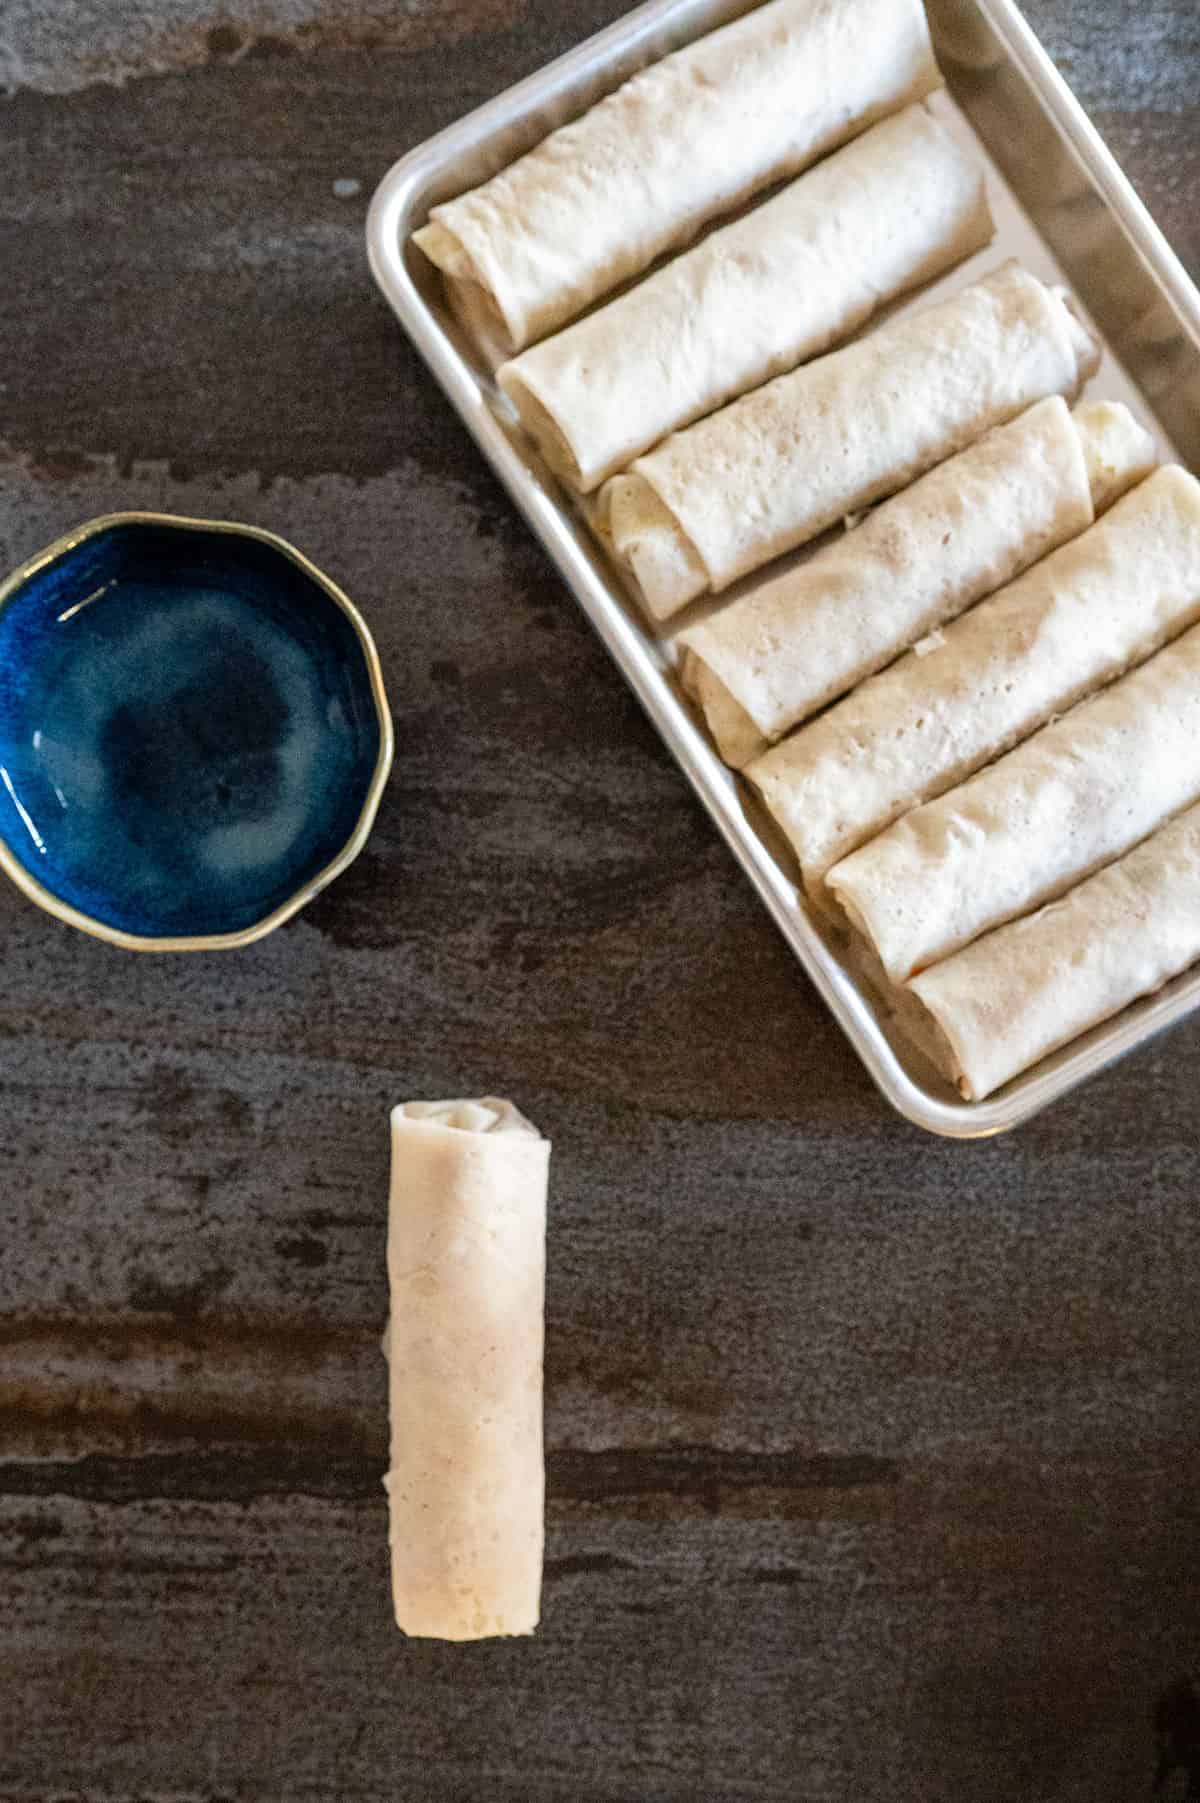 Rolled lumpia on a pan.